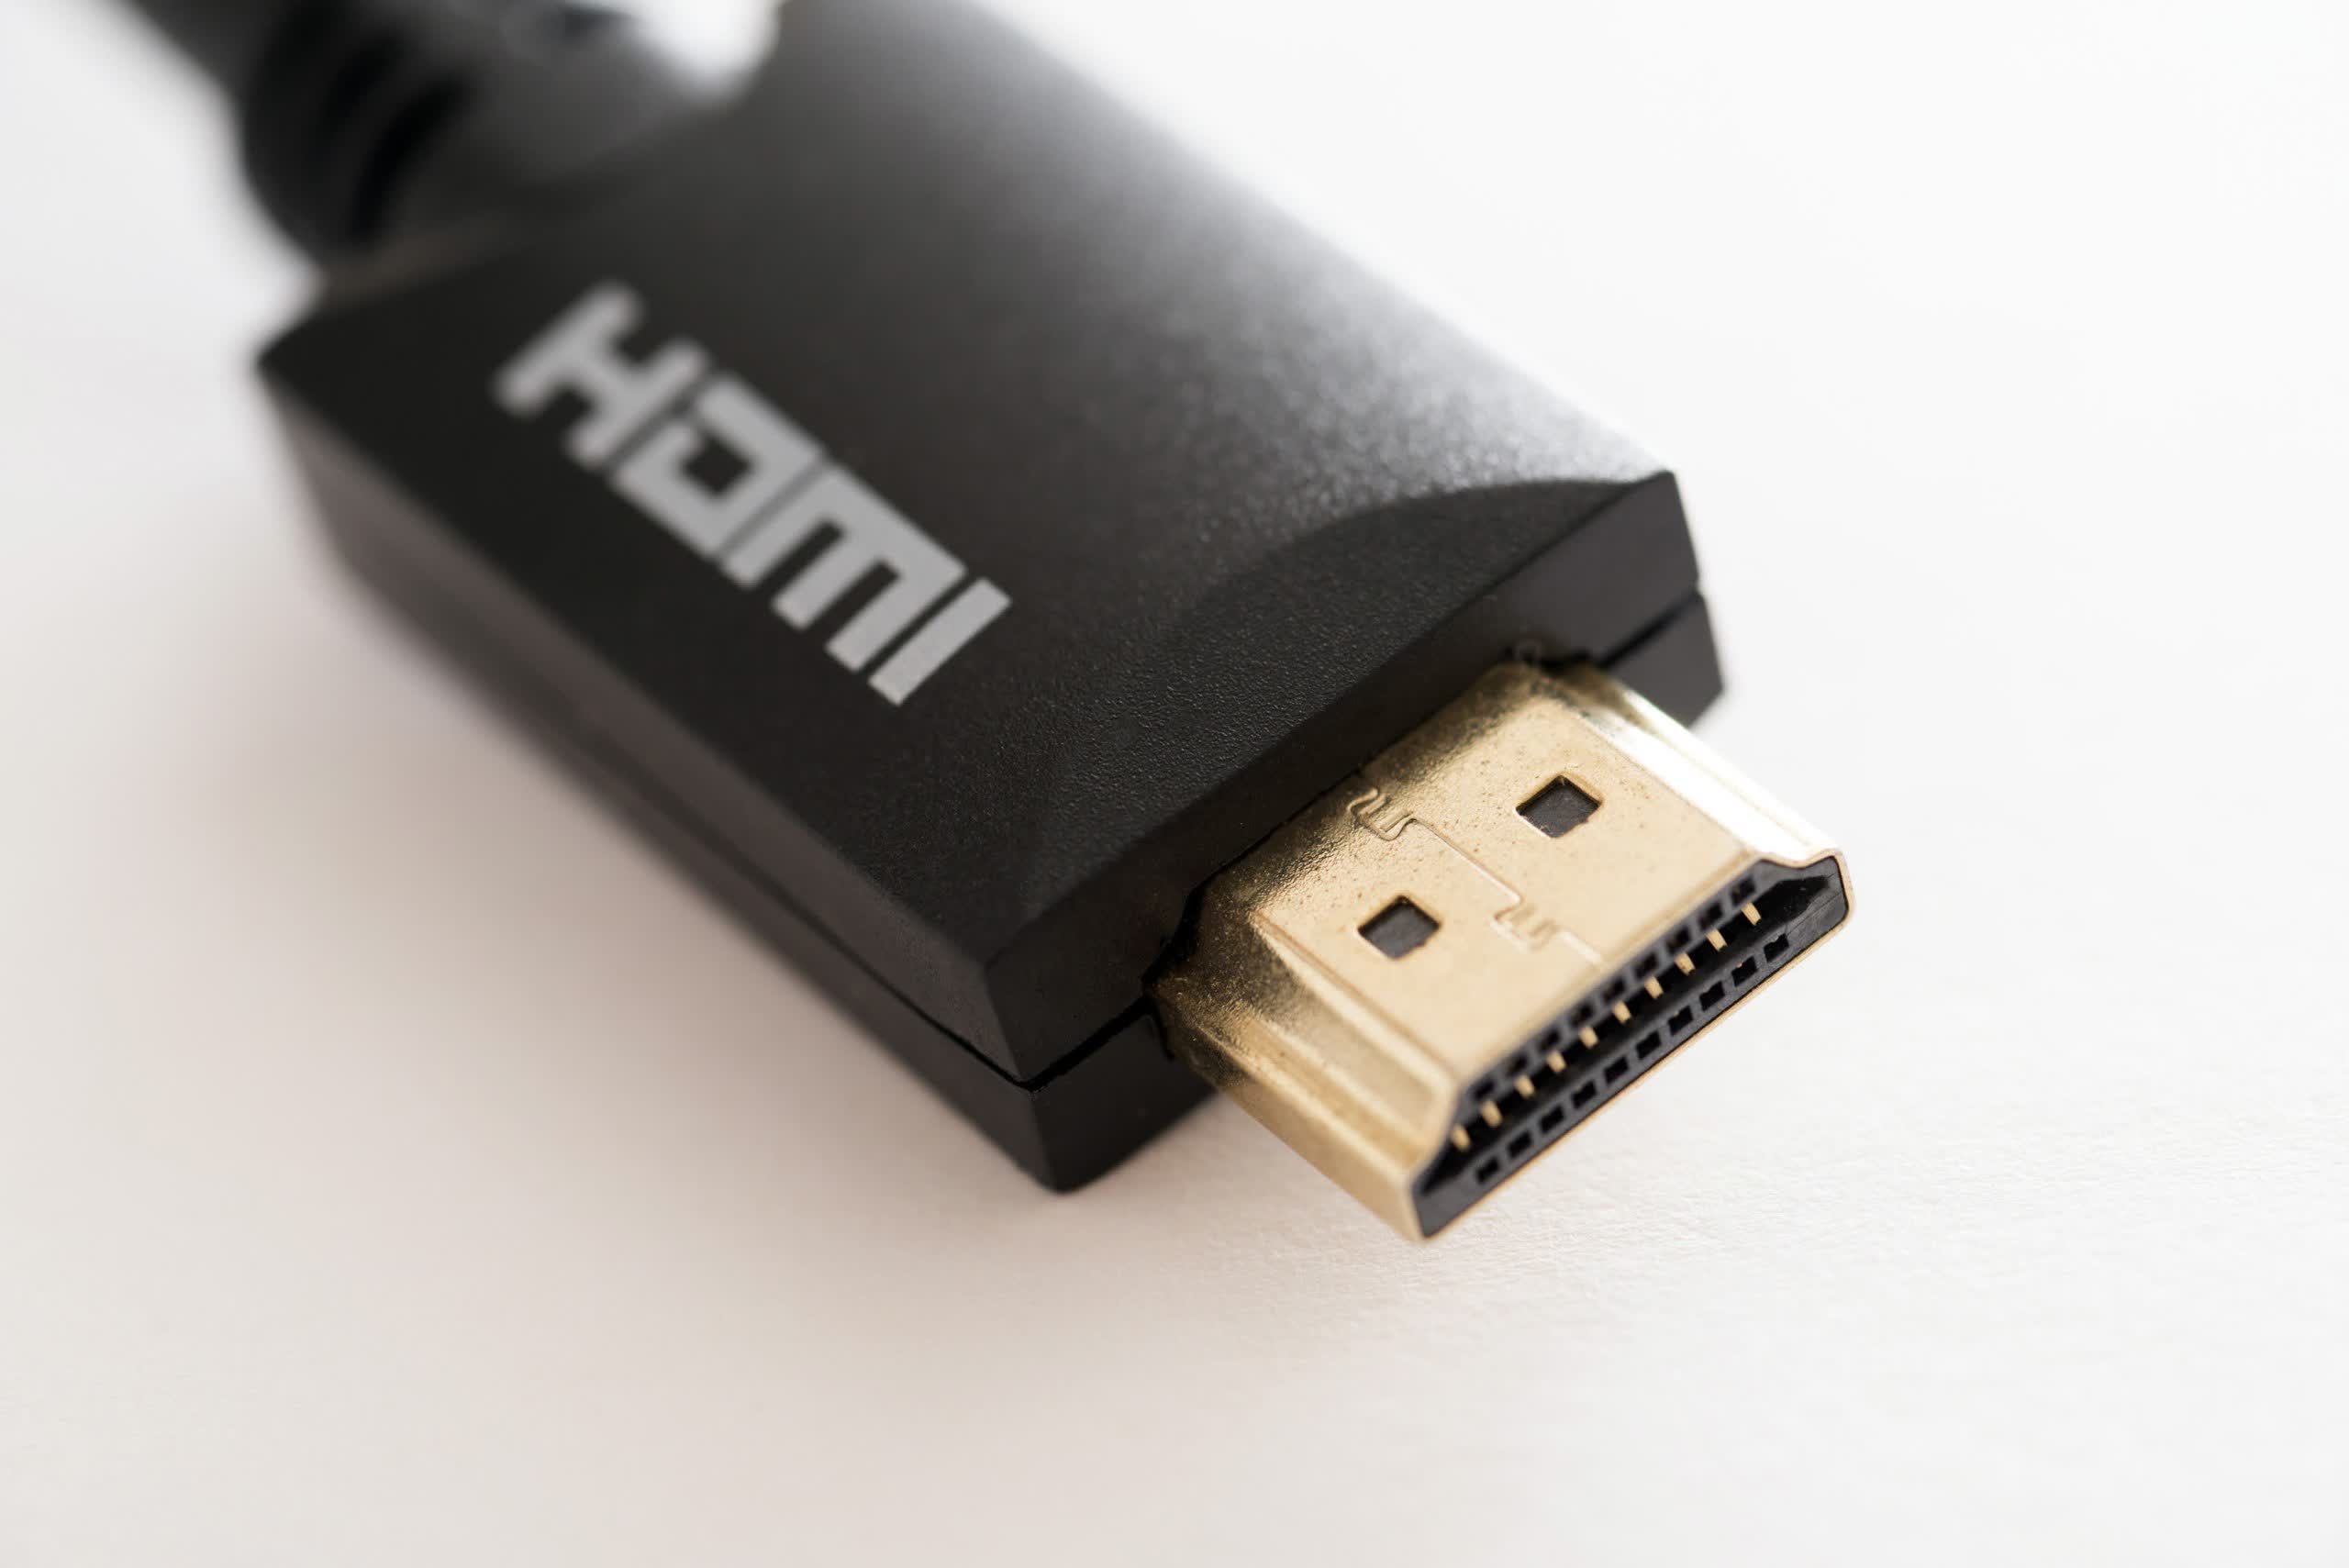 HDMI Cable Power removes the need for a separate power connector for active HDMI cables